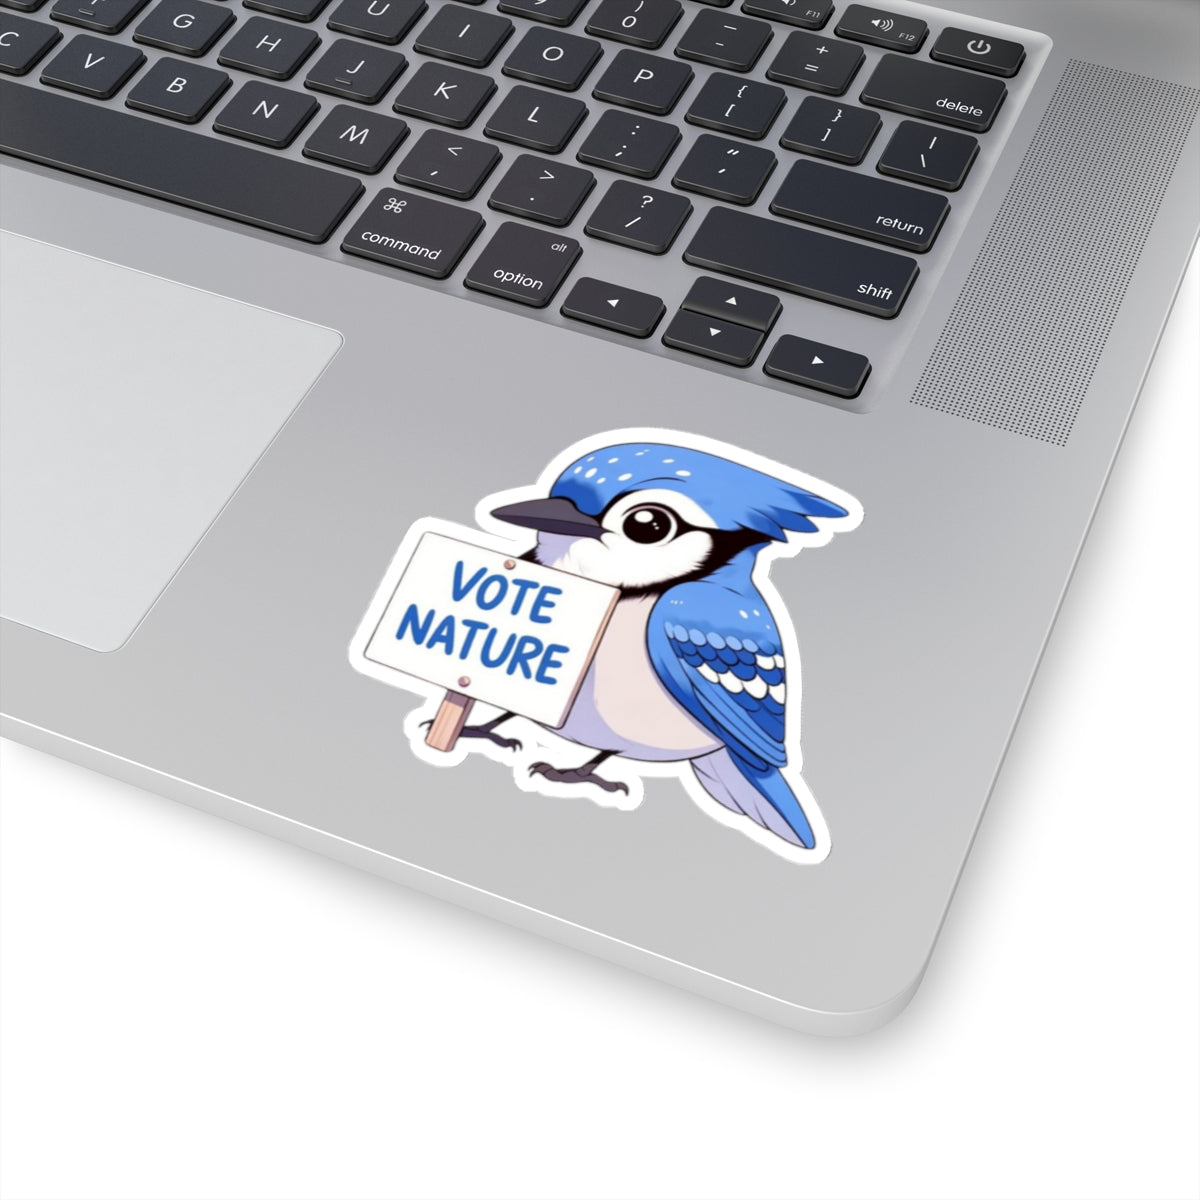 Inspirational Cute Bluejay Statement vinyl Sticker: Vote Nature! for laptop, kindle, phone, ipad, instrument case, notebook, mood board